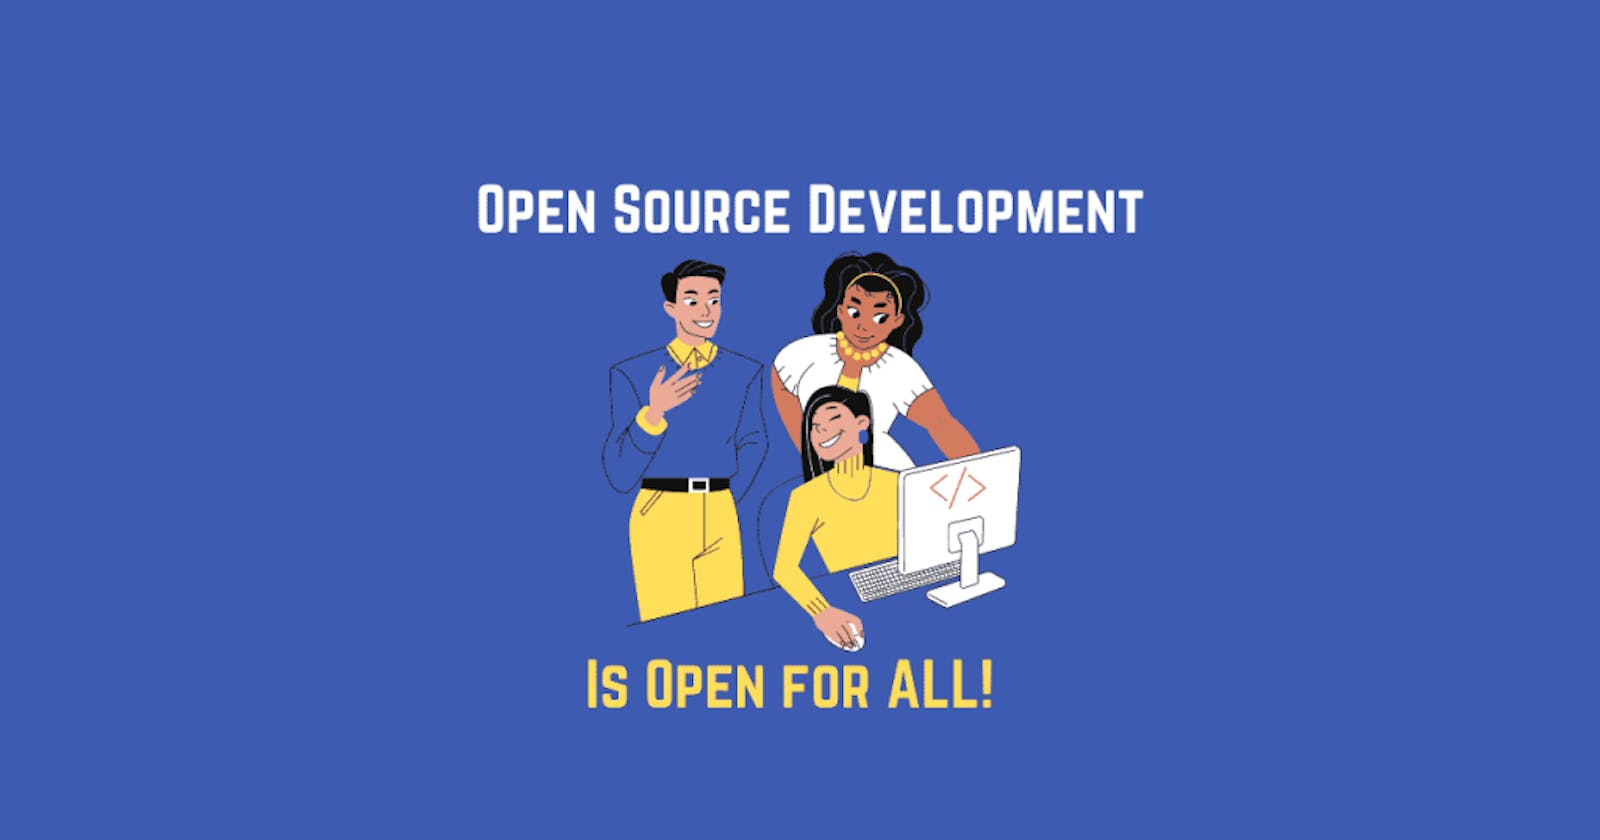 Why Open Source Development is a boon?